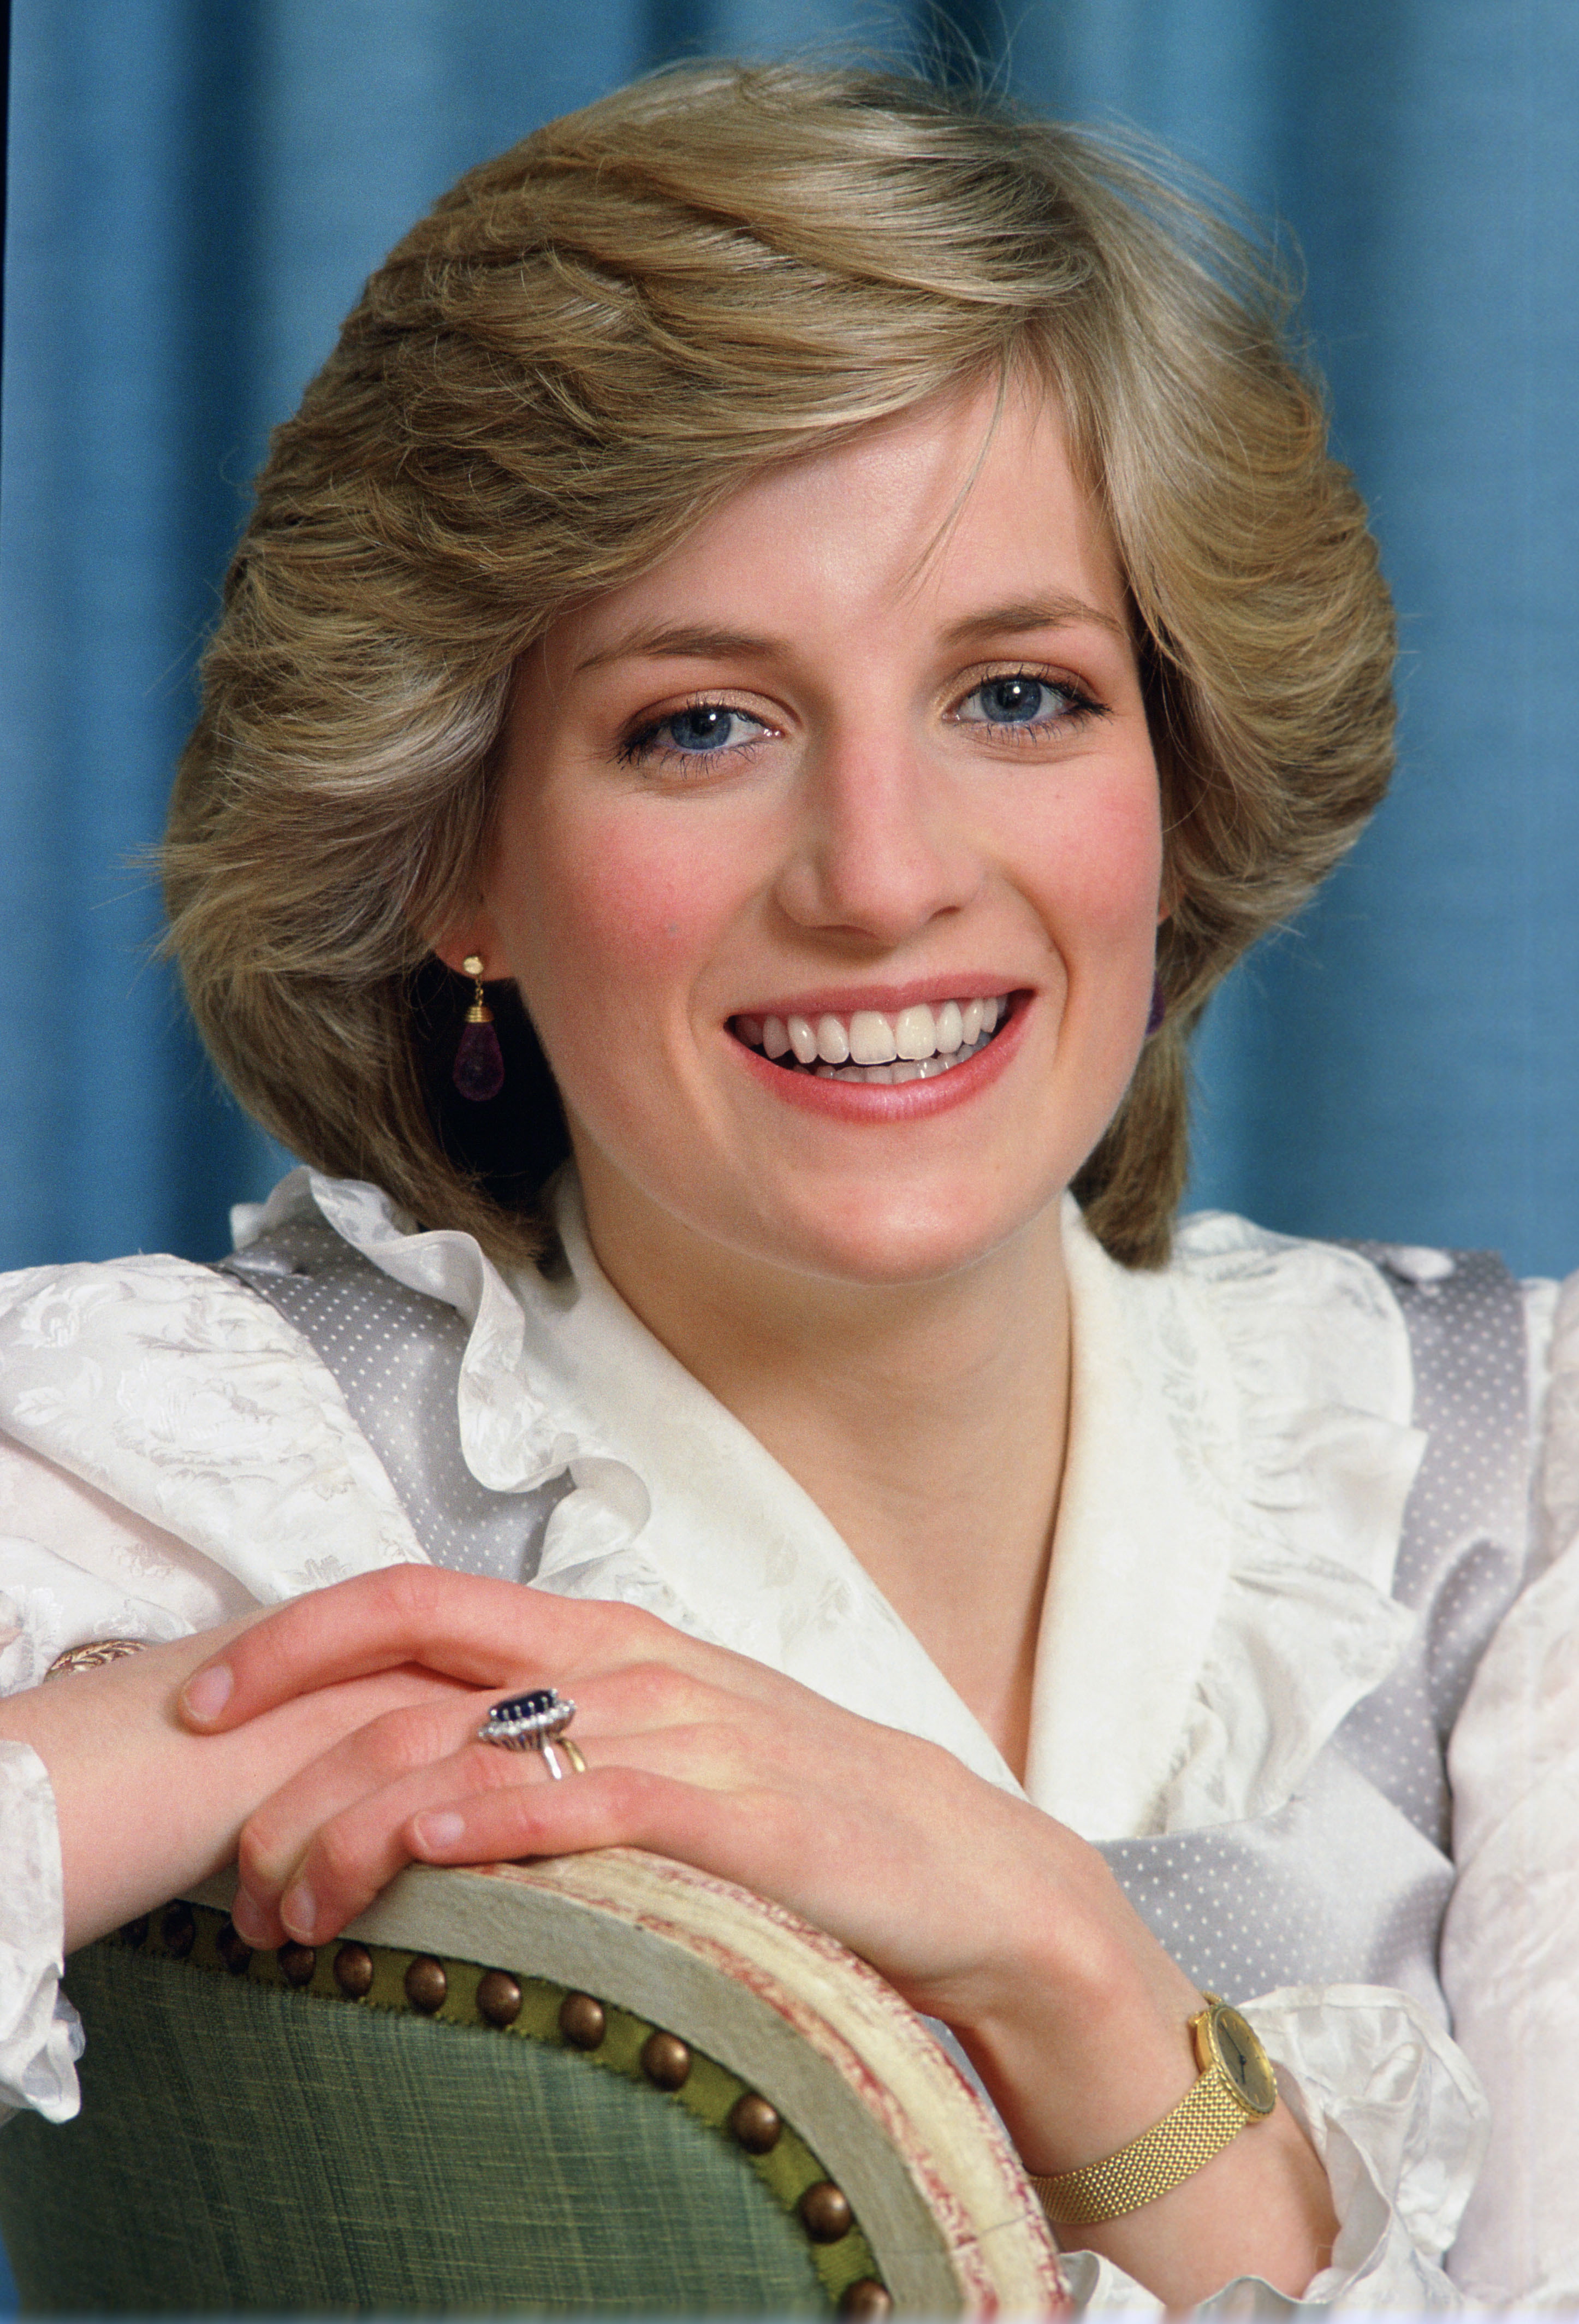 Princess Diana smiles for a photo in Kensington Palace | Source: Getty Images